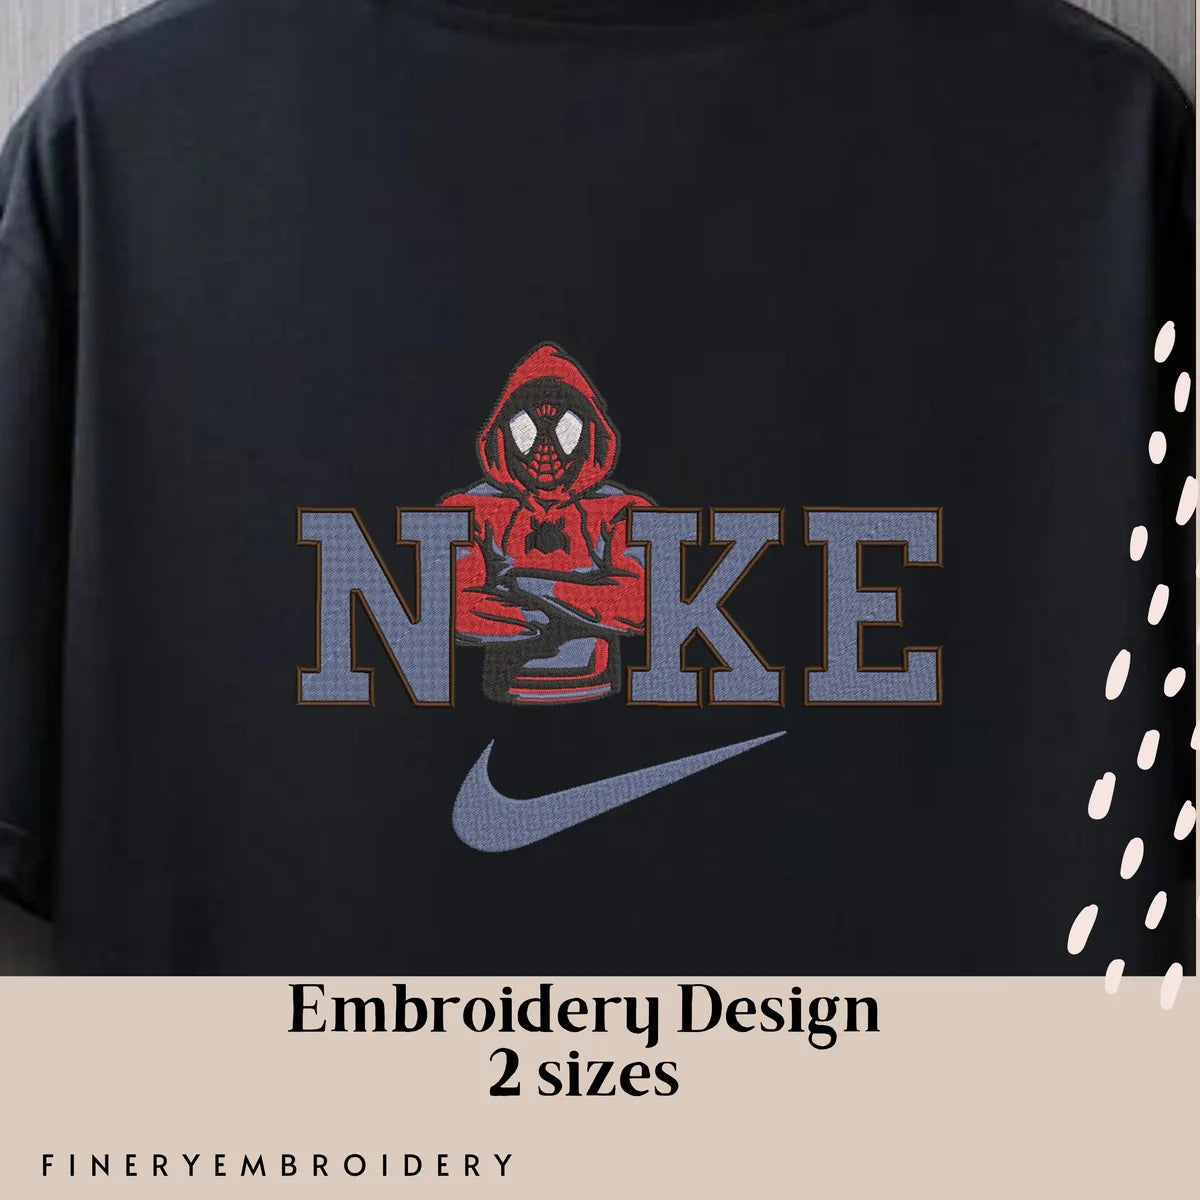 Nike and Spiderman 7 - Embroidery Design FineryEmbroidery